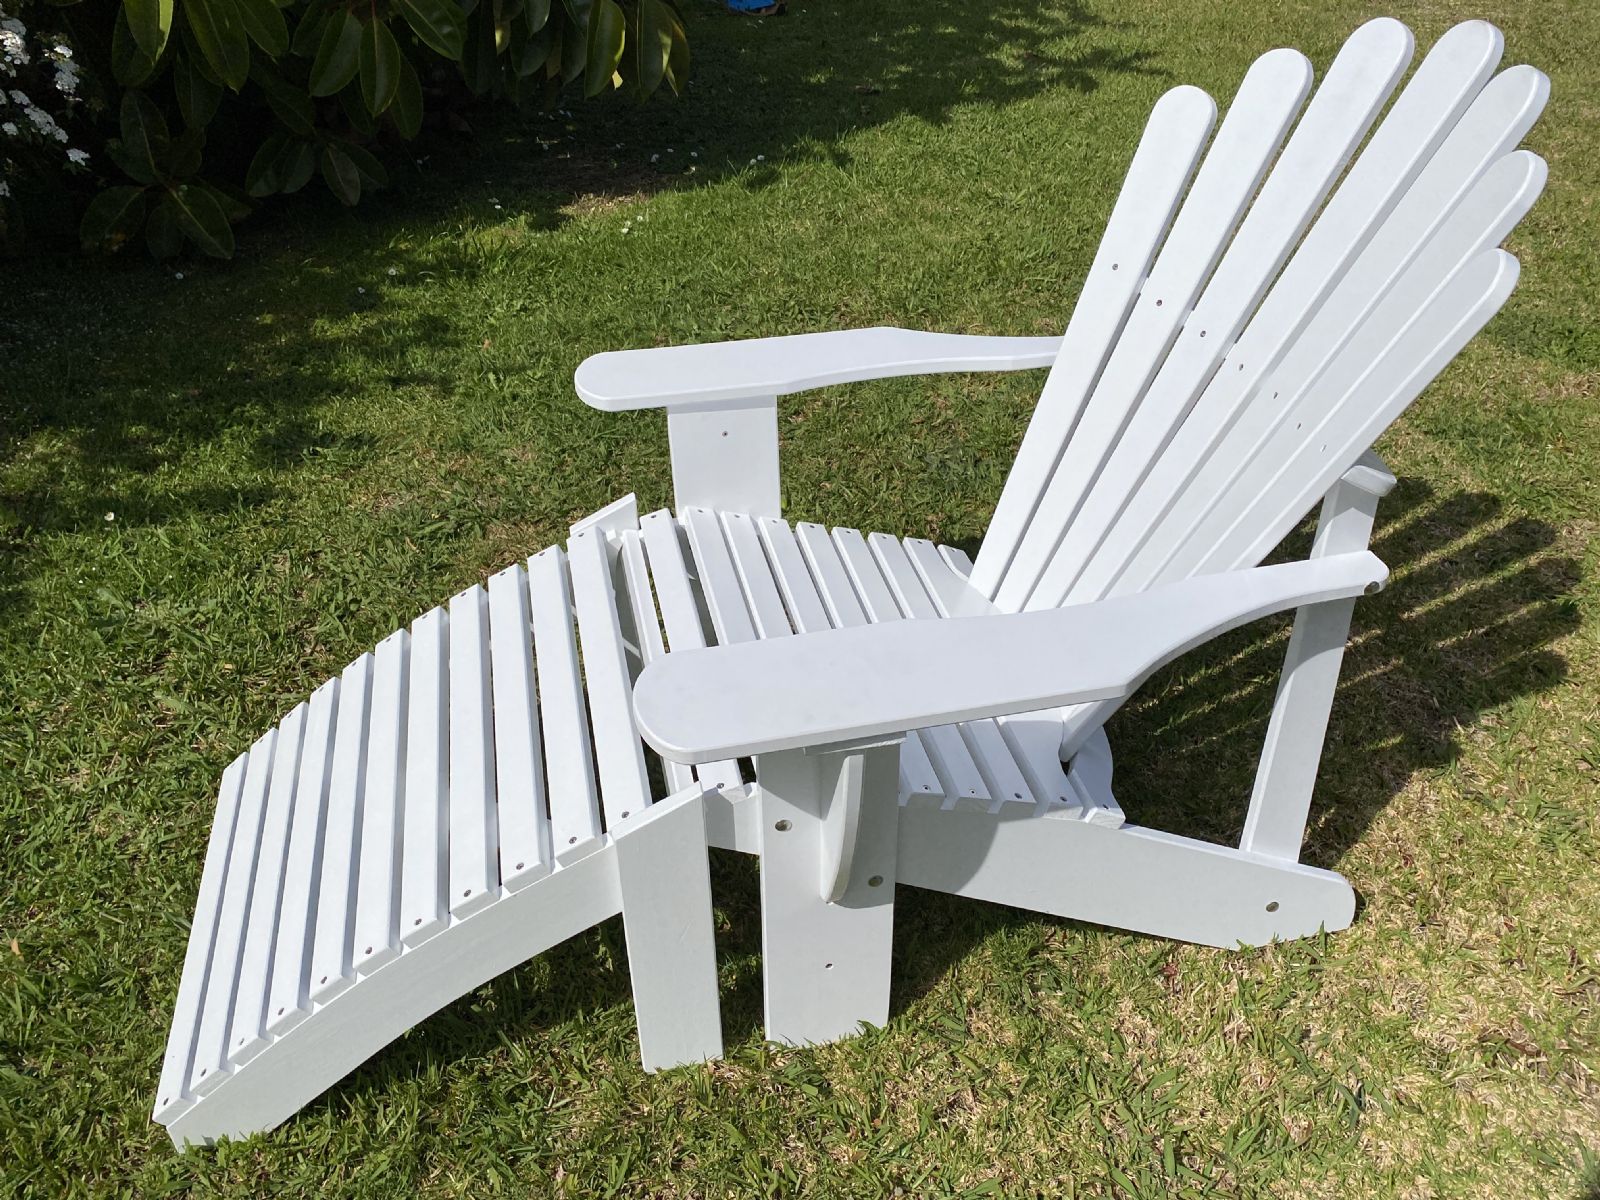 PAINTED CAPE COD / ADIRONDACK CHAIR: Fan tail + Stool + Cover